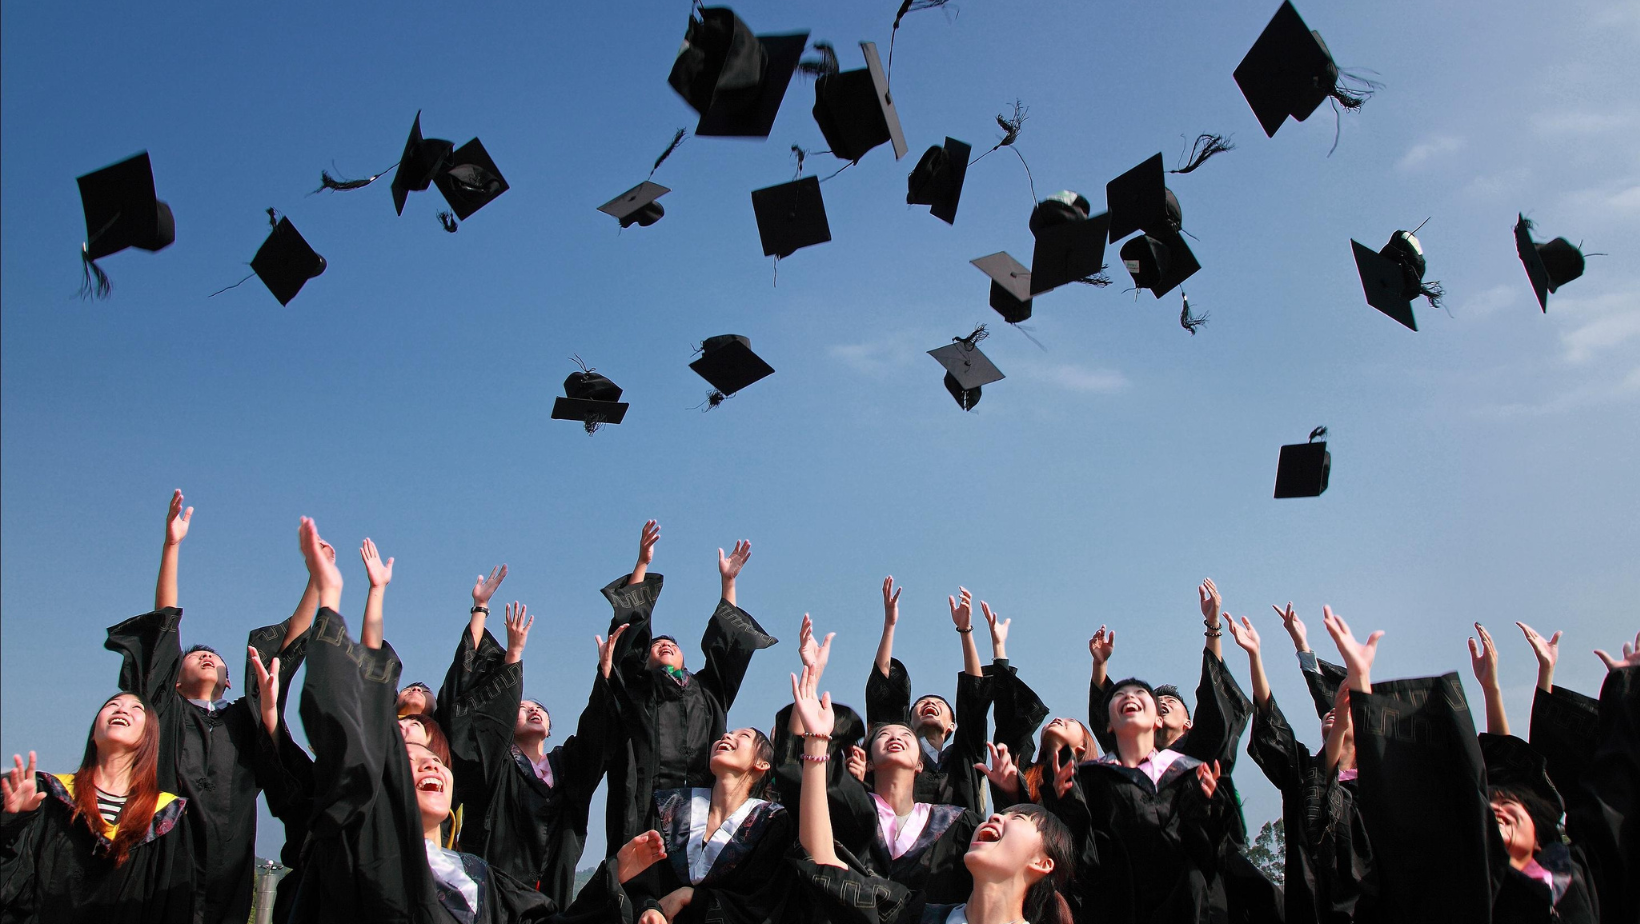 A Treasure Trove of Graduation Captions: One Student's Collection of 100 Memorable Quotes